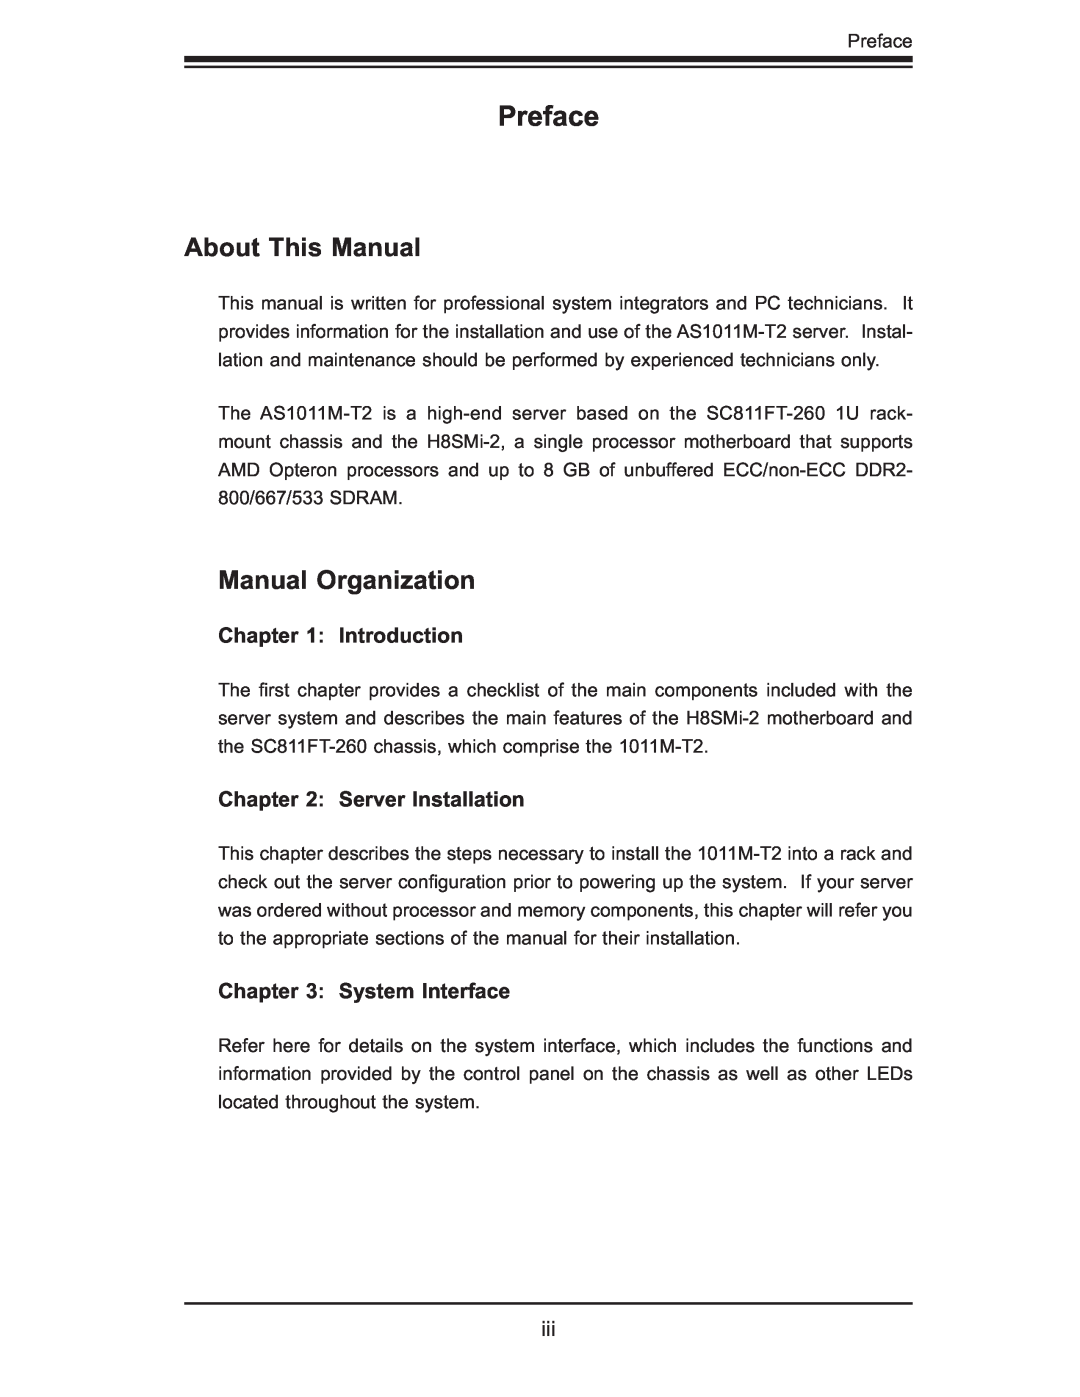 SUPER MICRO Computer AS1011M-T2 Preface, About This Manual, Manual Organization, Introduction, Server Installation 